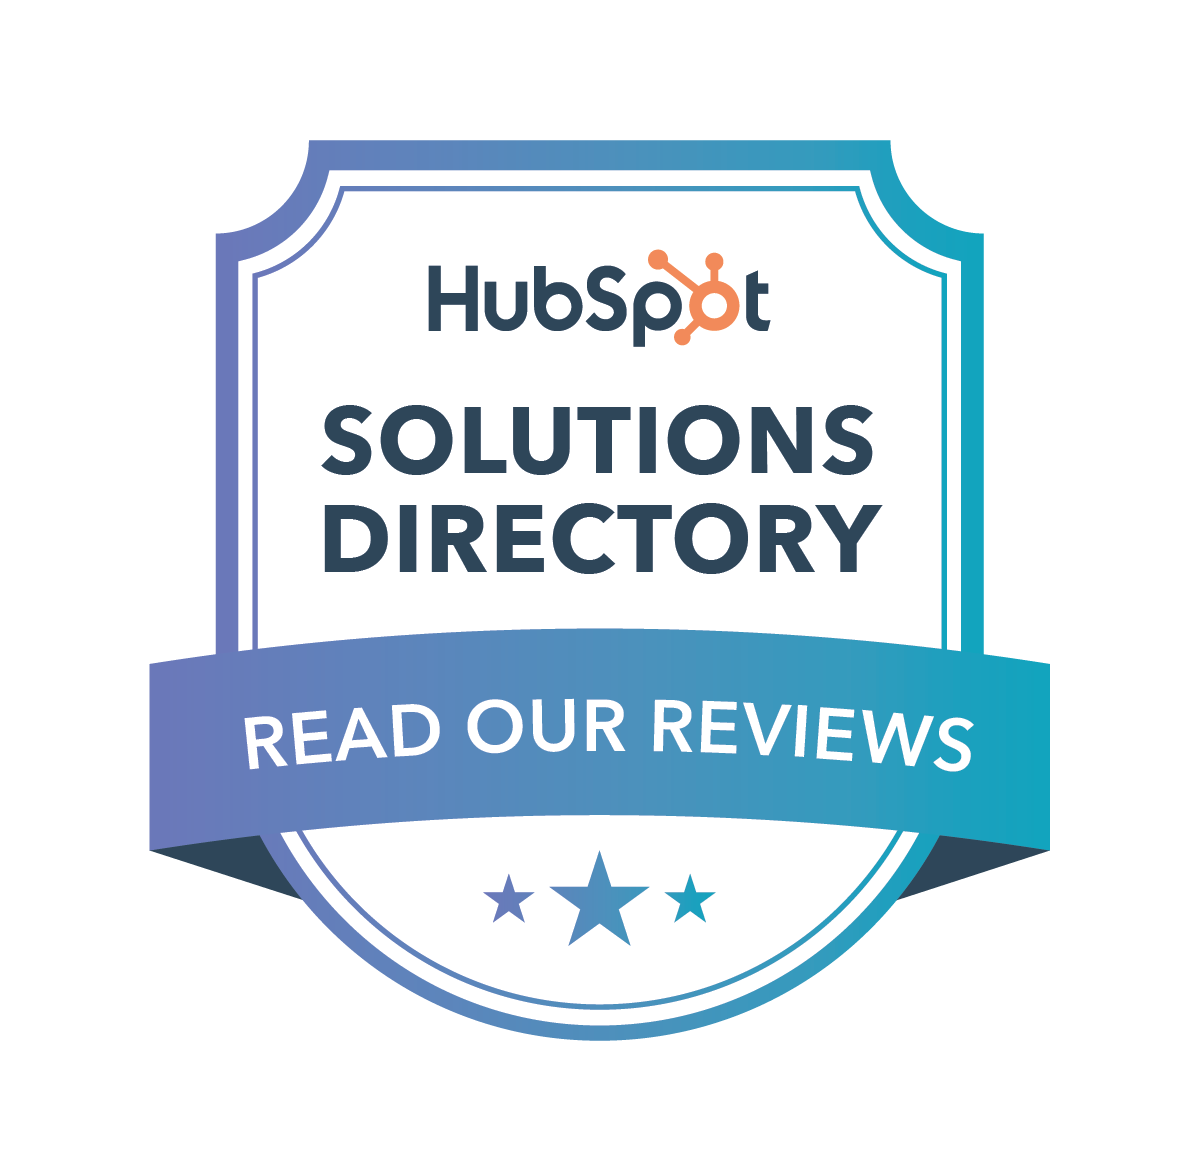 Read our Reviews on HubSpot's Solutions Directory